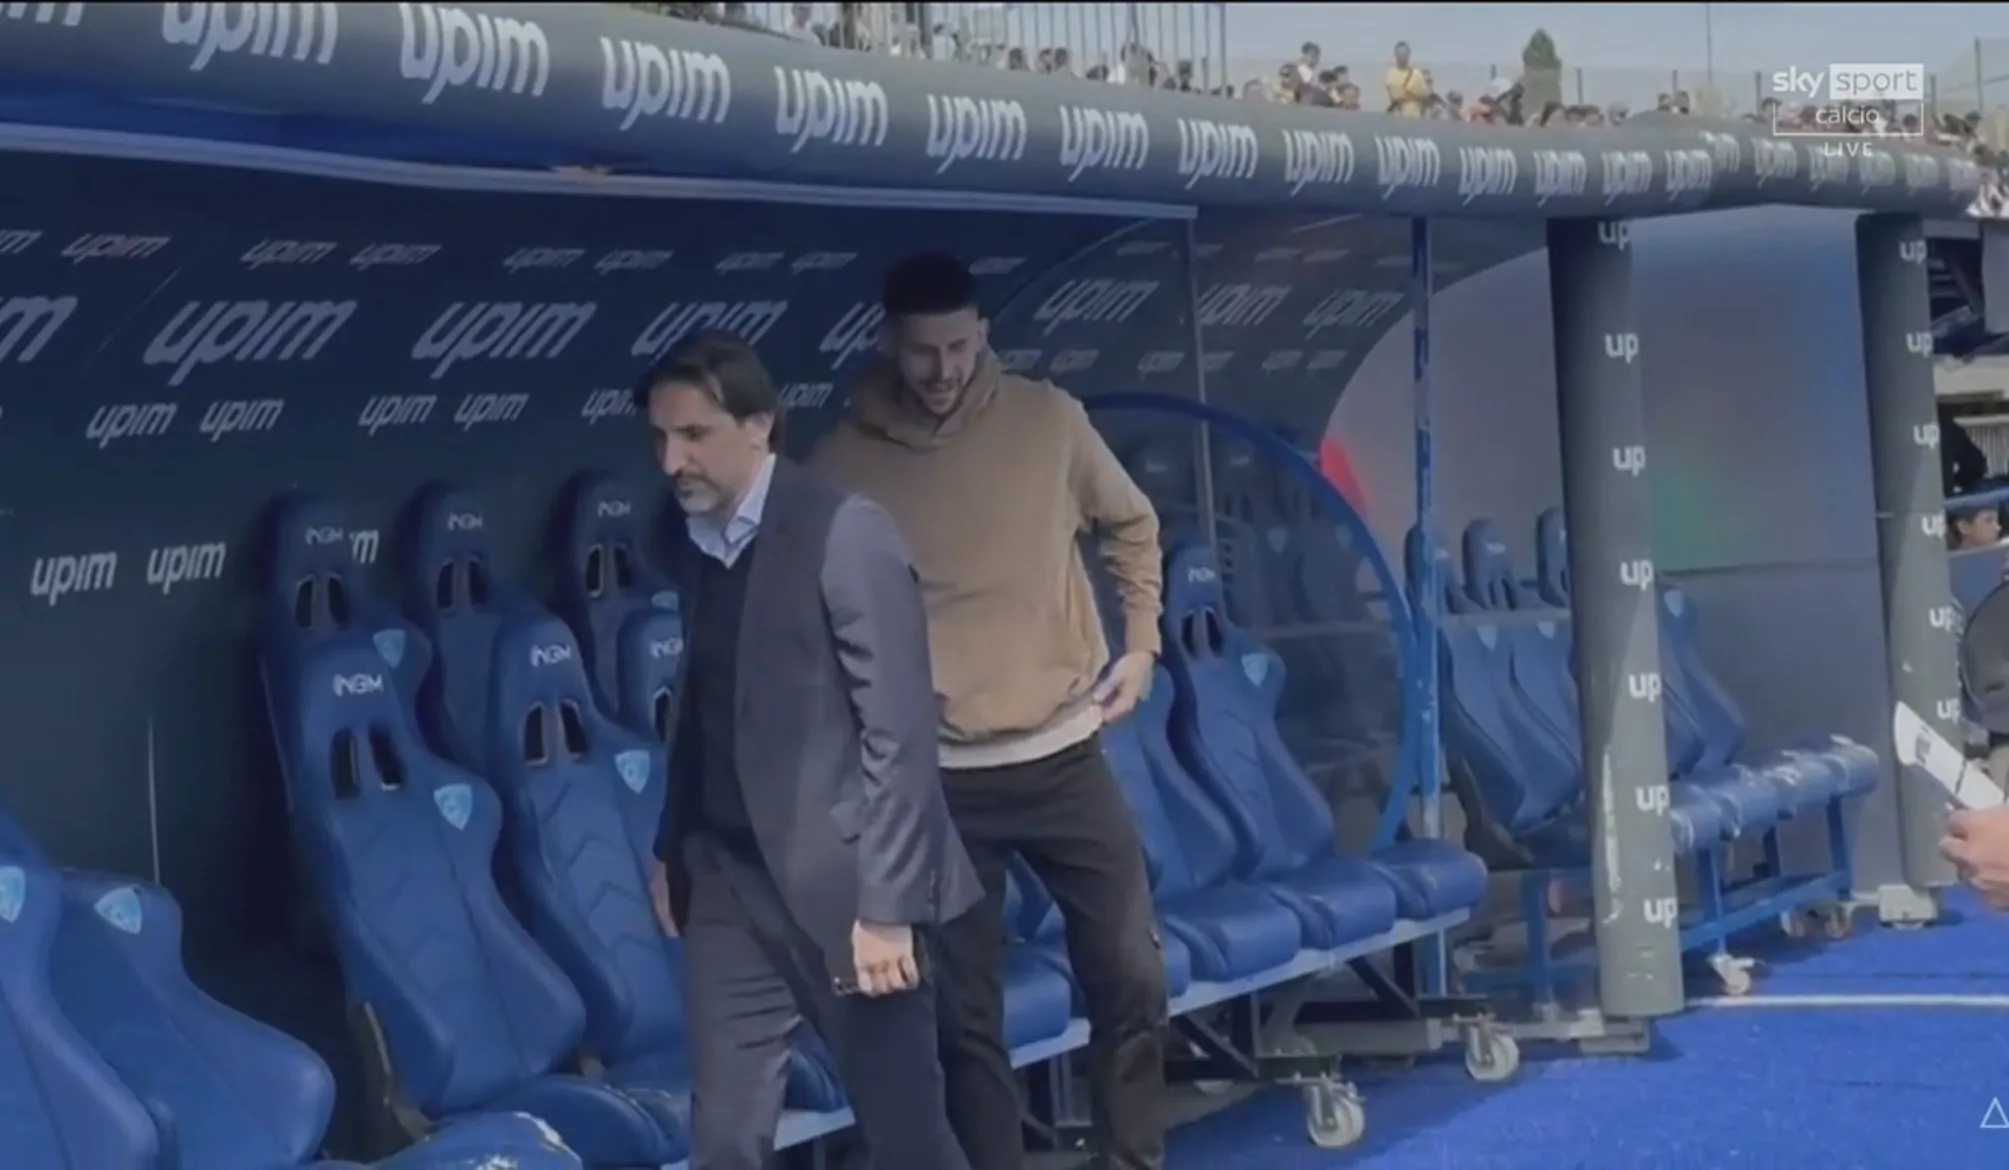 Inter visited Empoli over the weekend, and deputy sporting director Dario Baccin was spotted speaking with Guglielmo Vicario before the match.